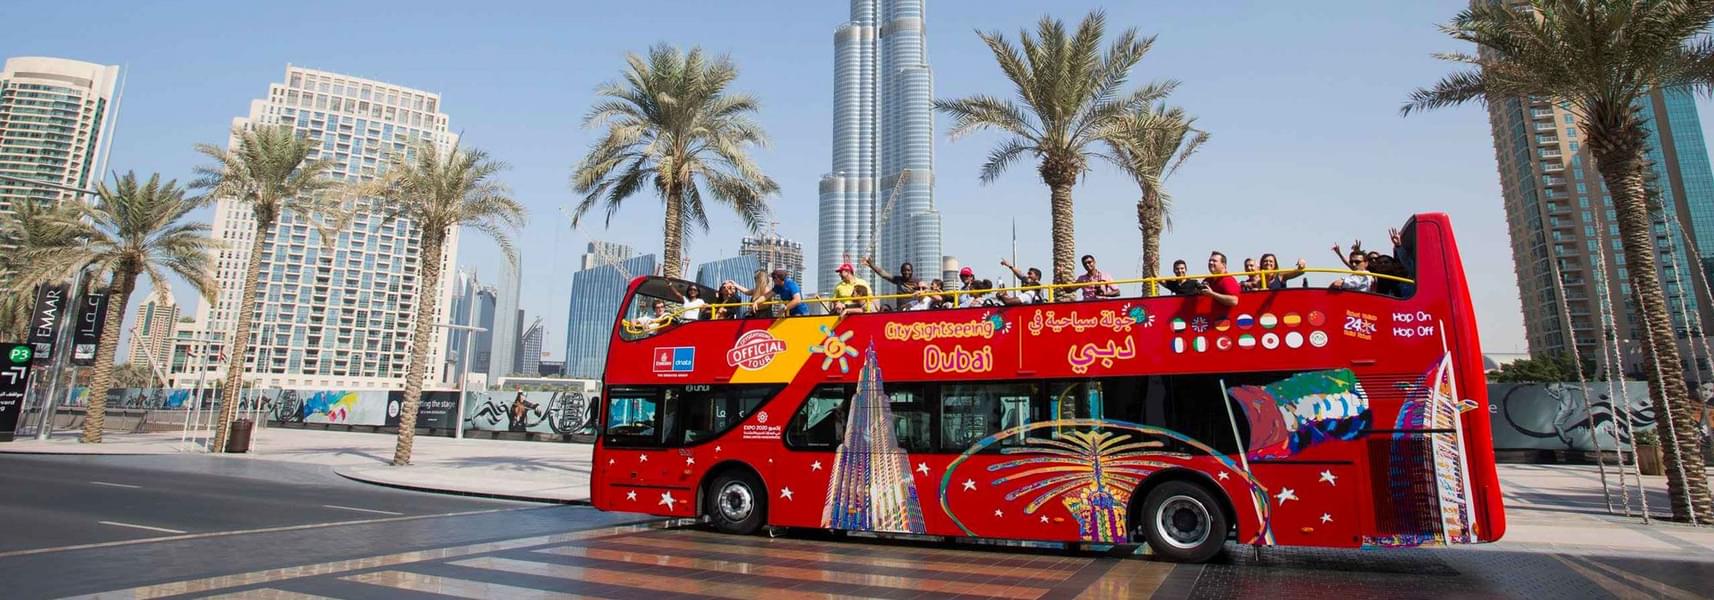 Half Day Hop-On-Hop-Off Sightseeing Bus Tour